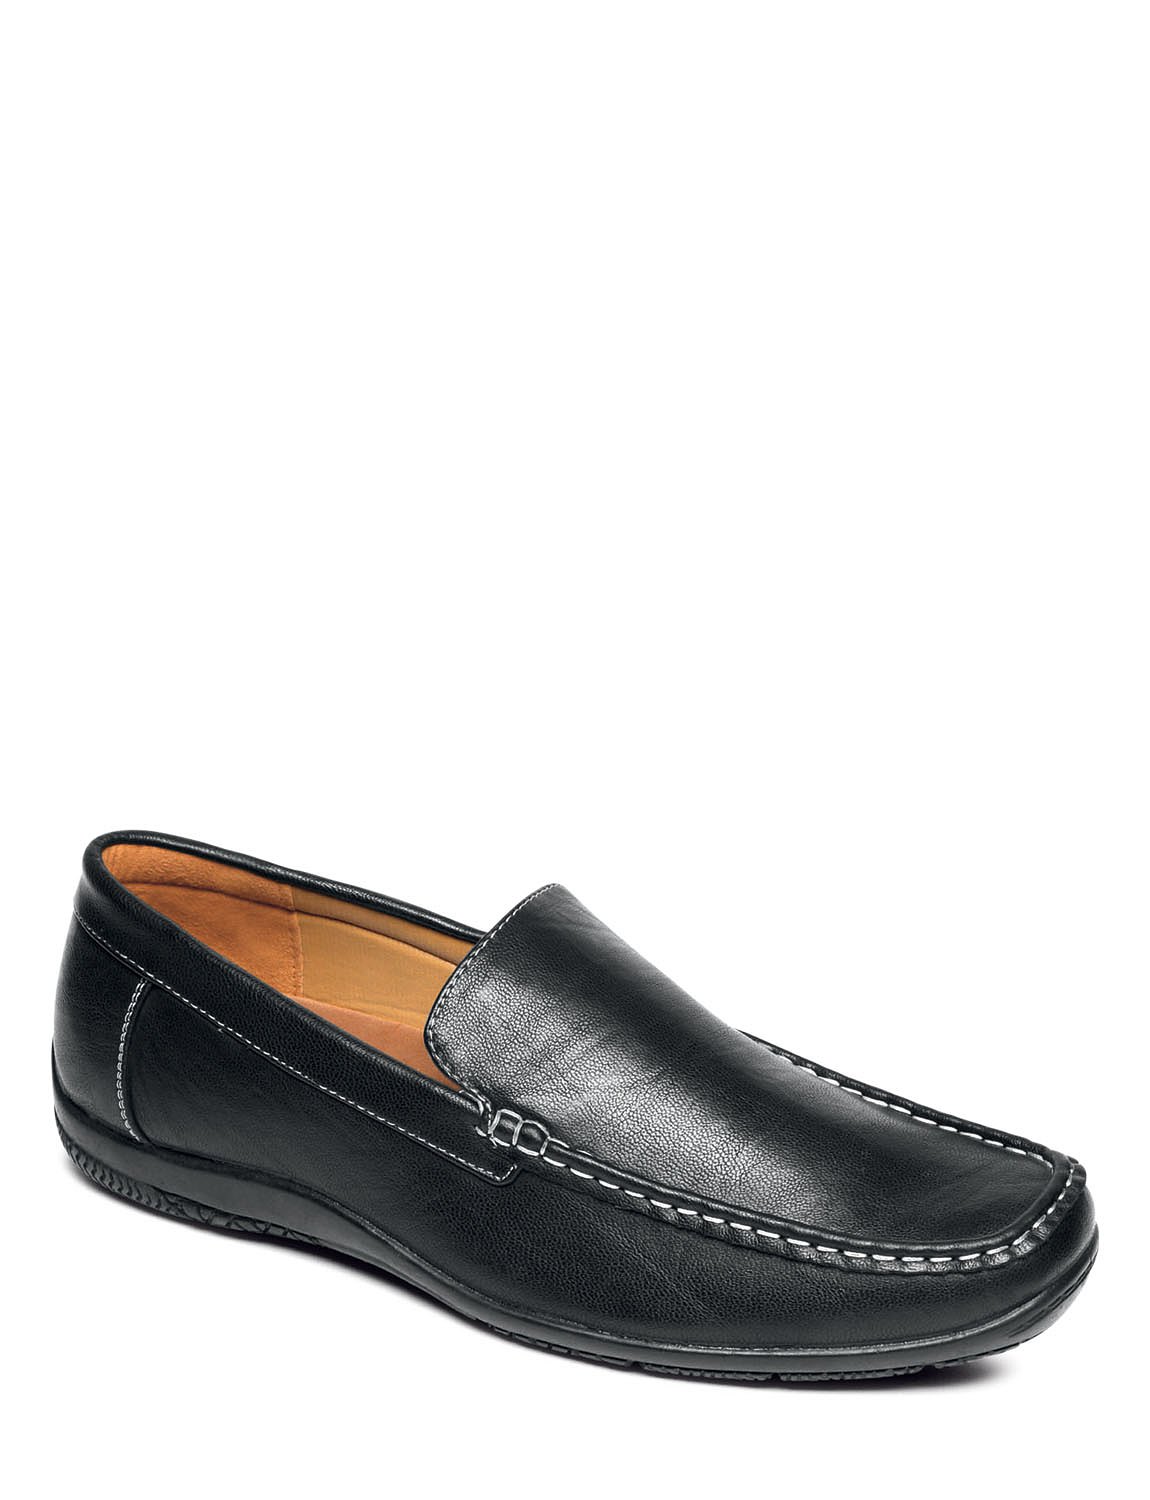 Mens Slip On Driving Loafer | Chums